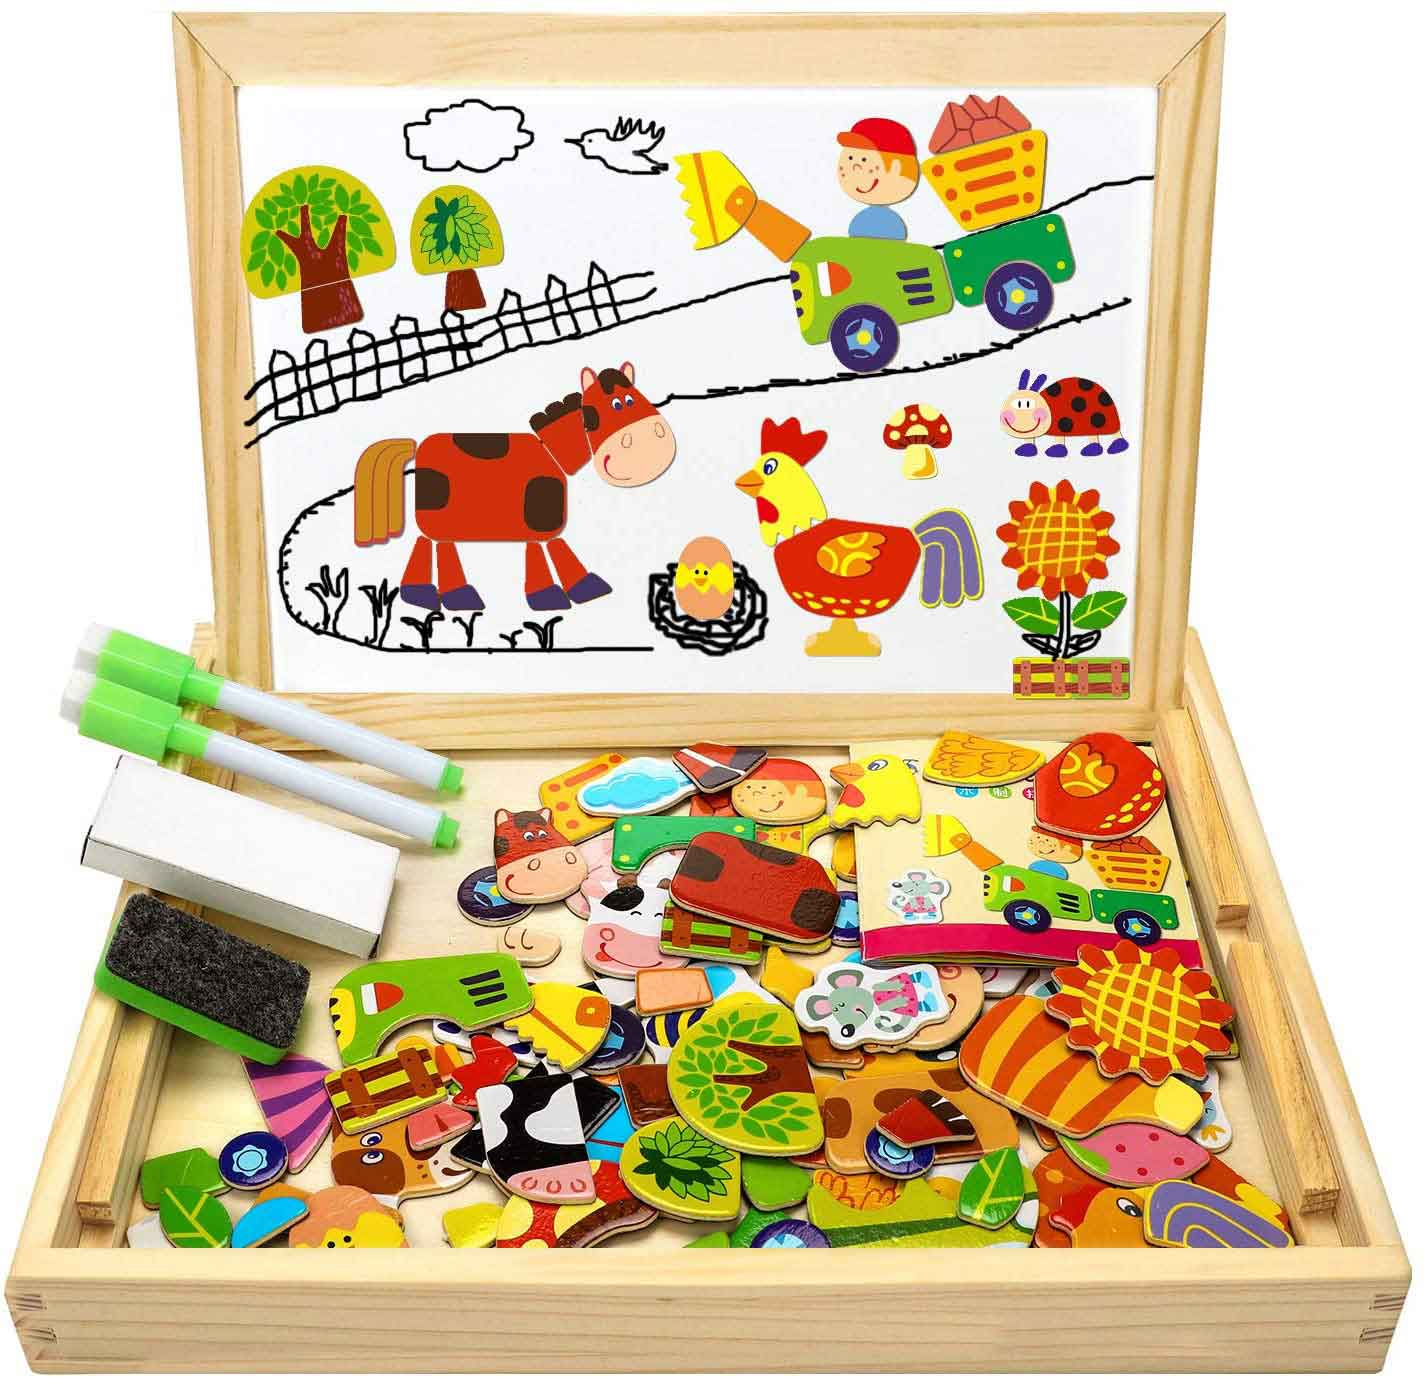 COOLJOY Wooden Magnetic Board Puzzle Games, 100+ PCS Double Sided Jigsaw Farm Pattern Drawing Easel Blackboard Educational Wood Toys for Boys Girls Kids Toddler Over 3 Year Olds